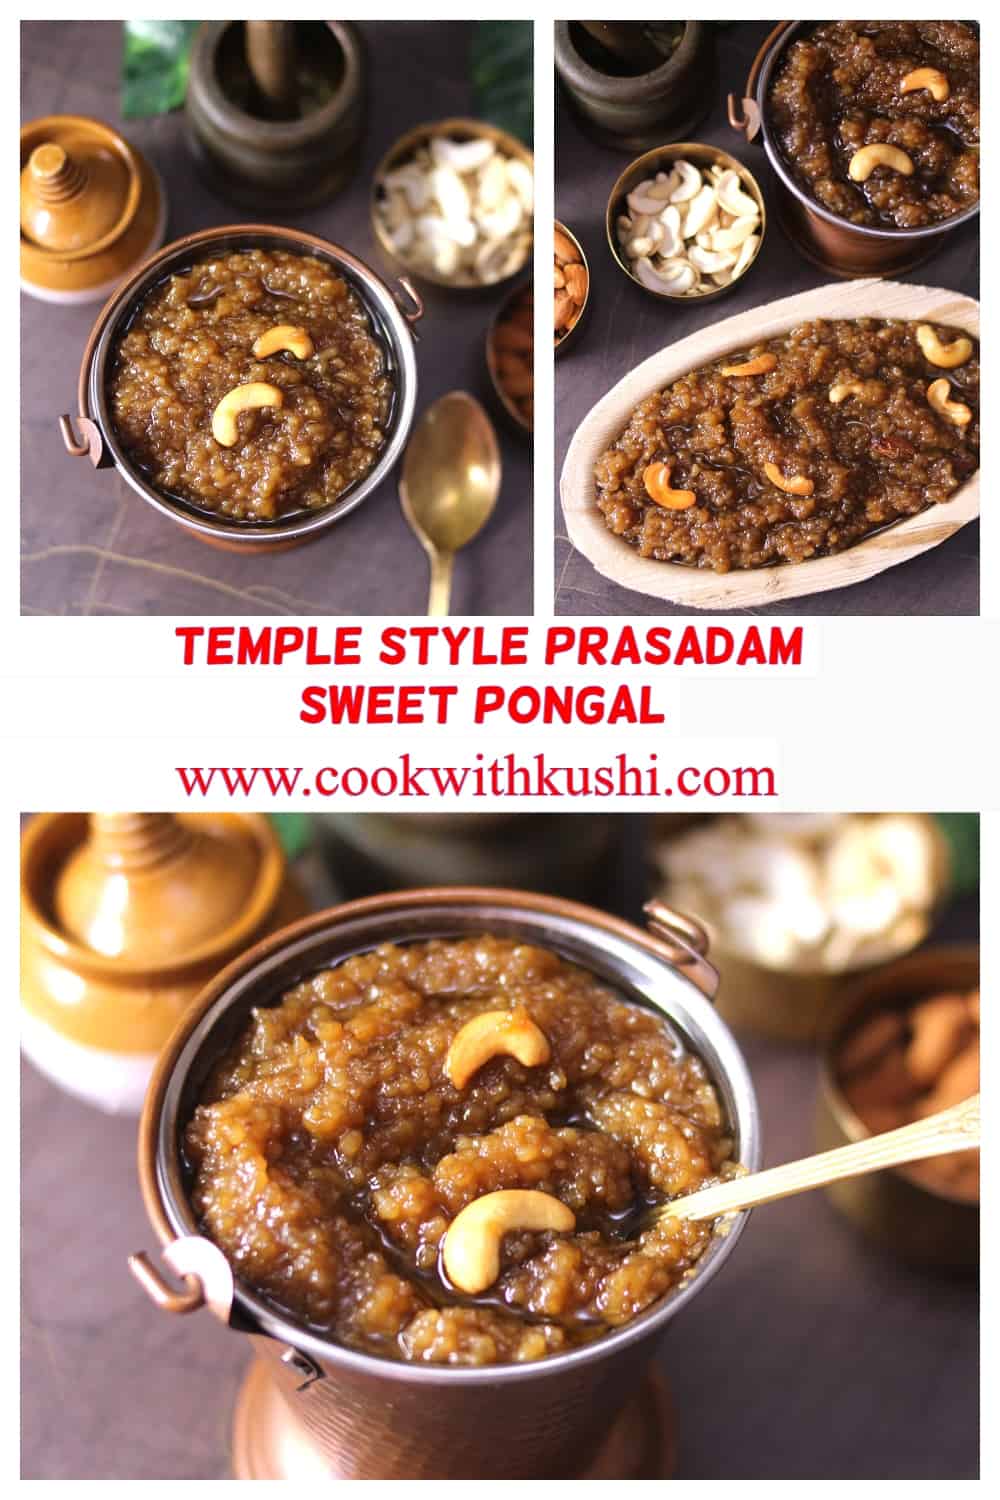 3 different images of traditional temple style payasam or sweet pongal khichdi recipe served in brass bucket and arecanut plates